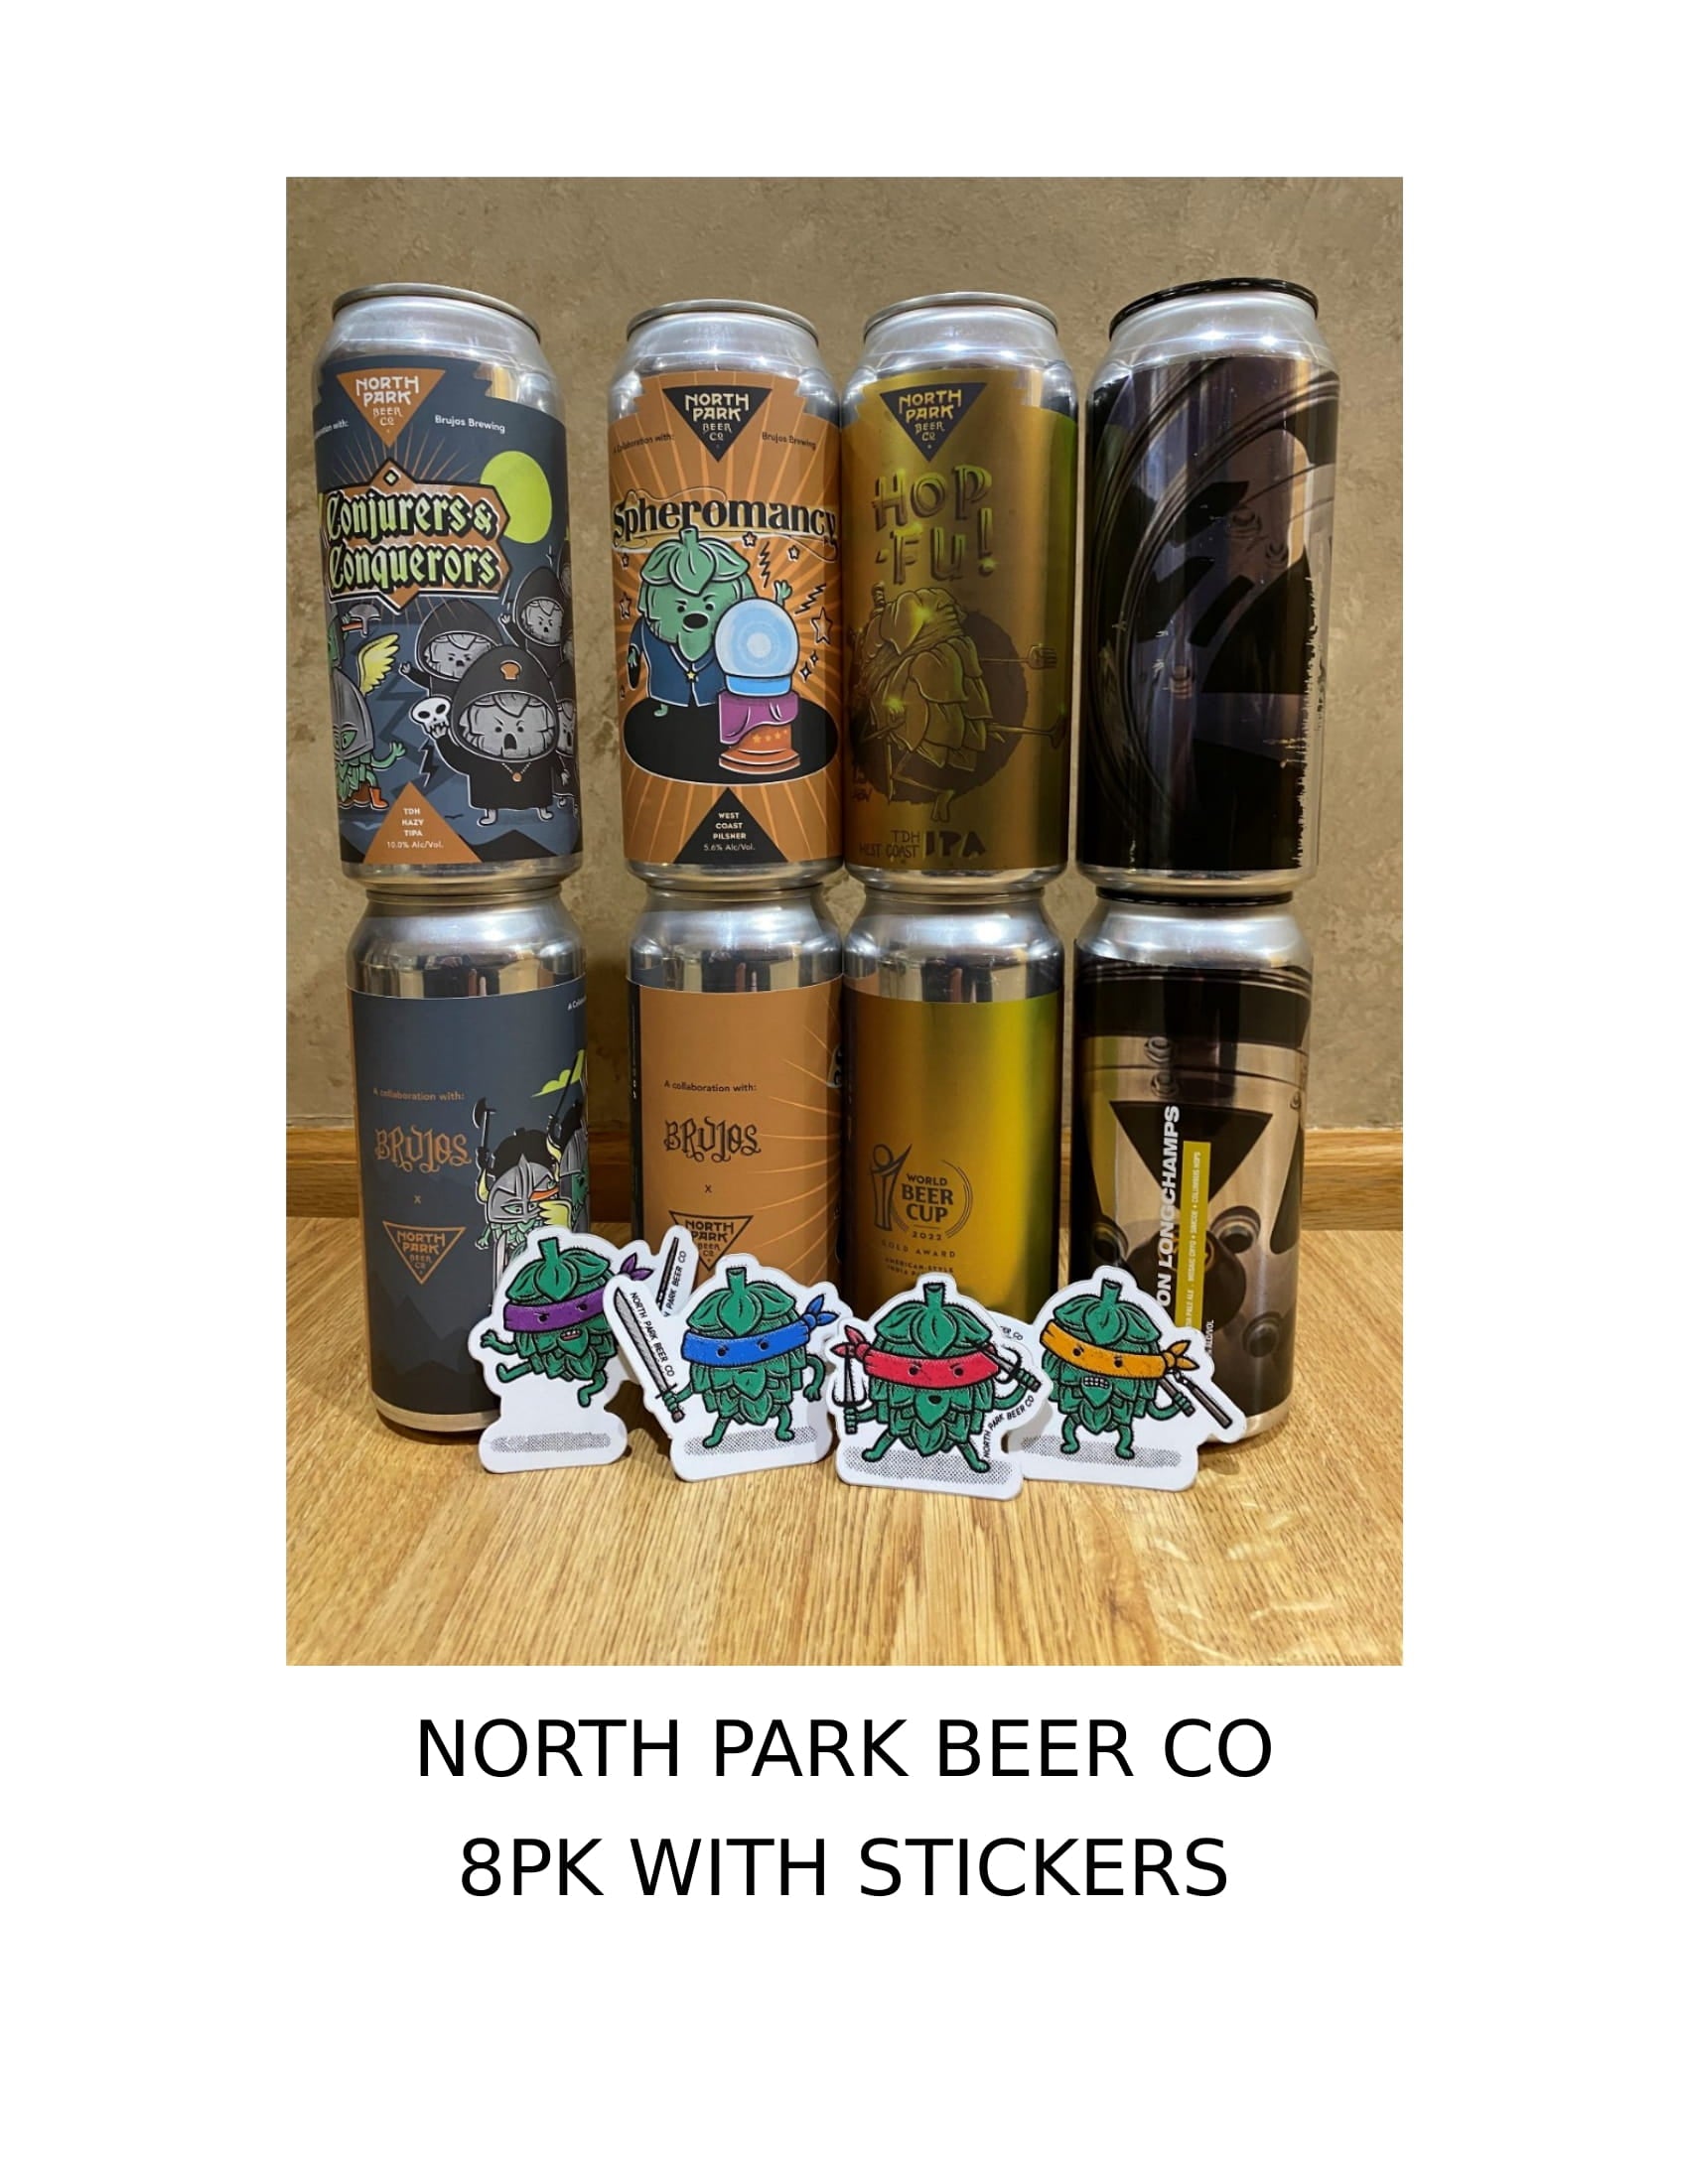 NORTH PARK BEER CO